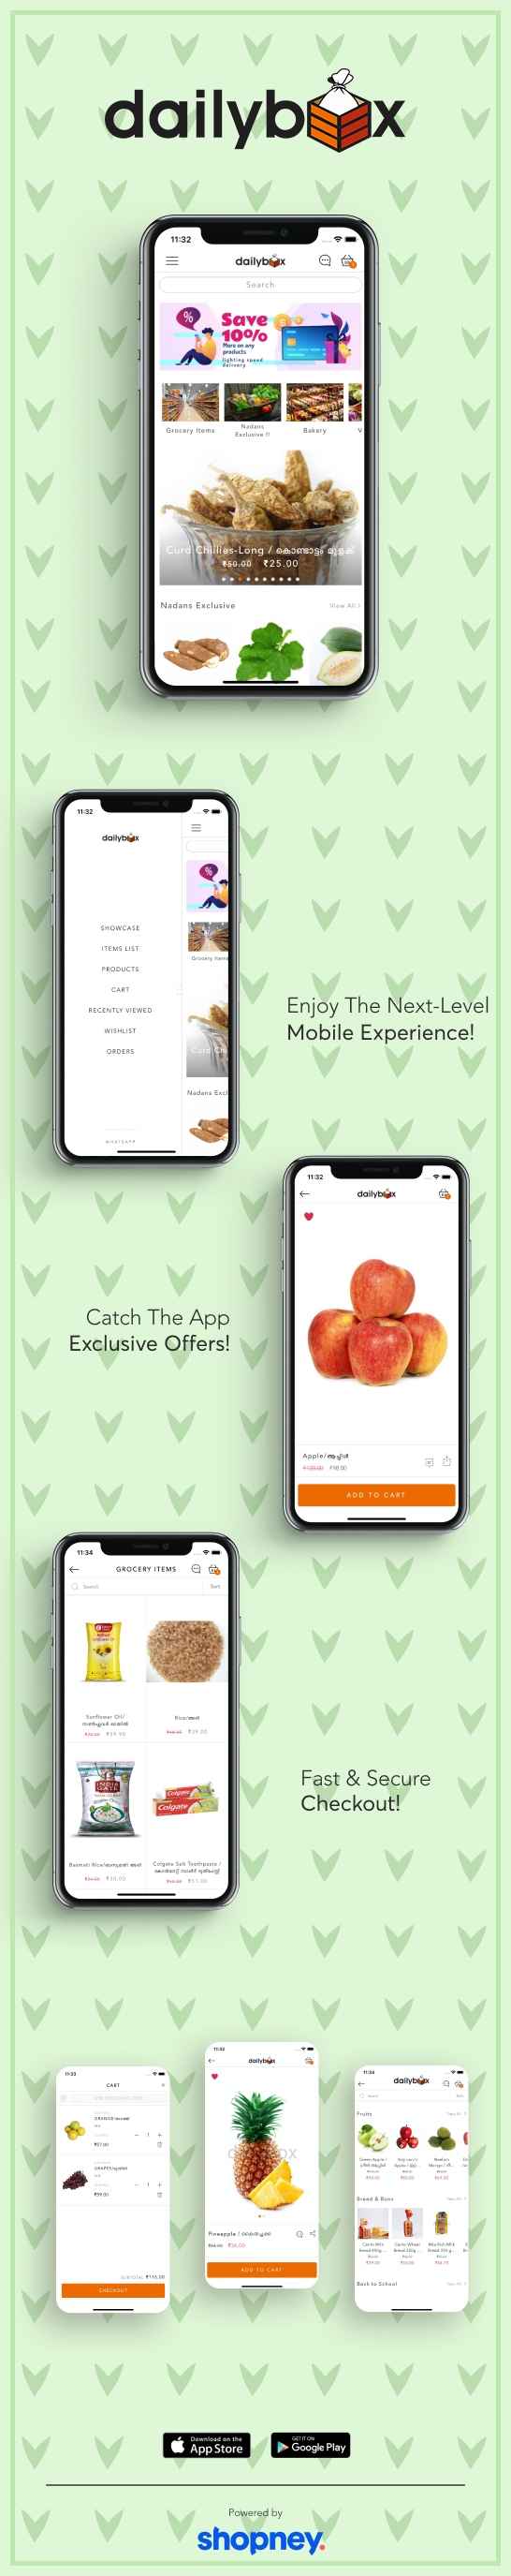 the mobile app design of Daily Box app